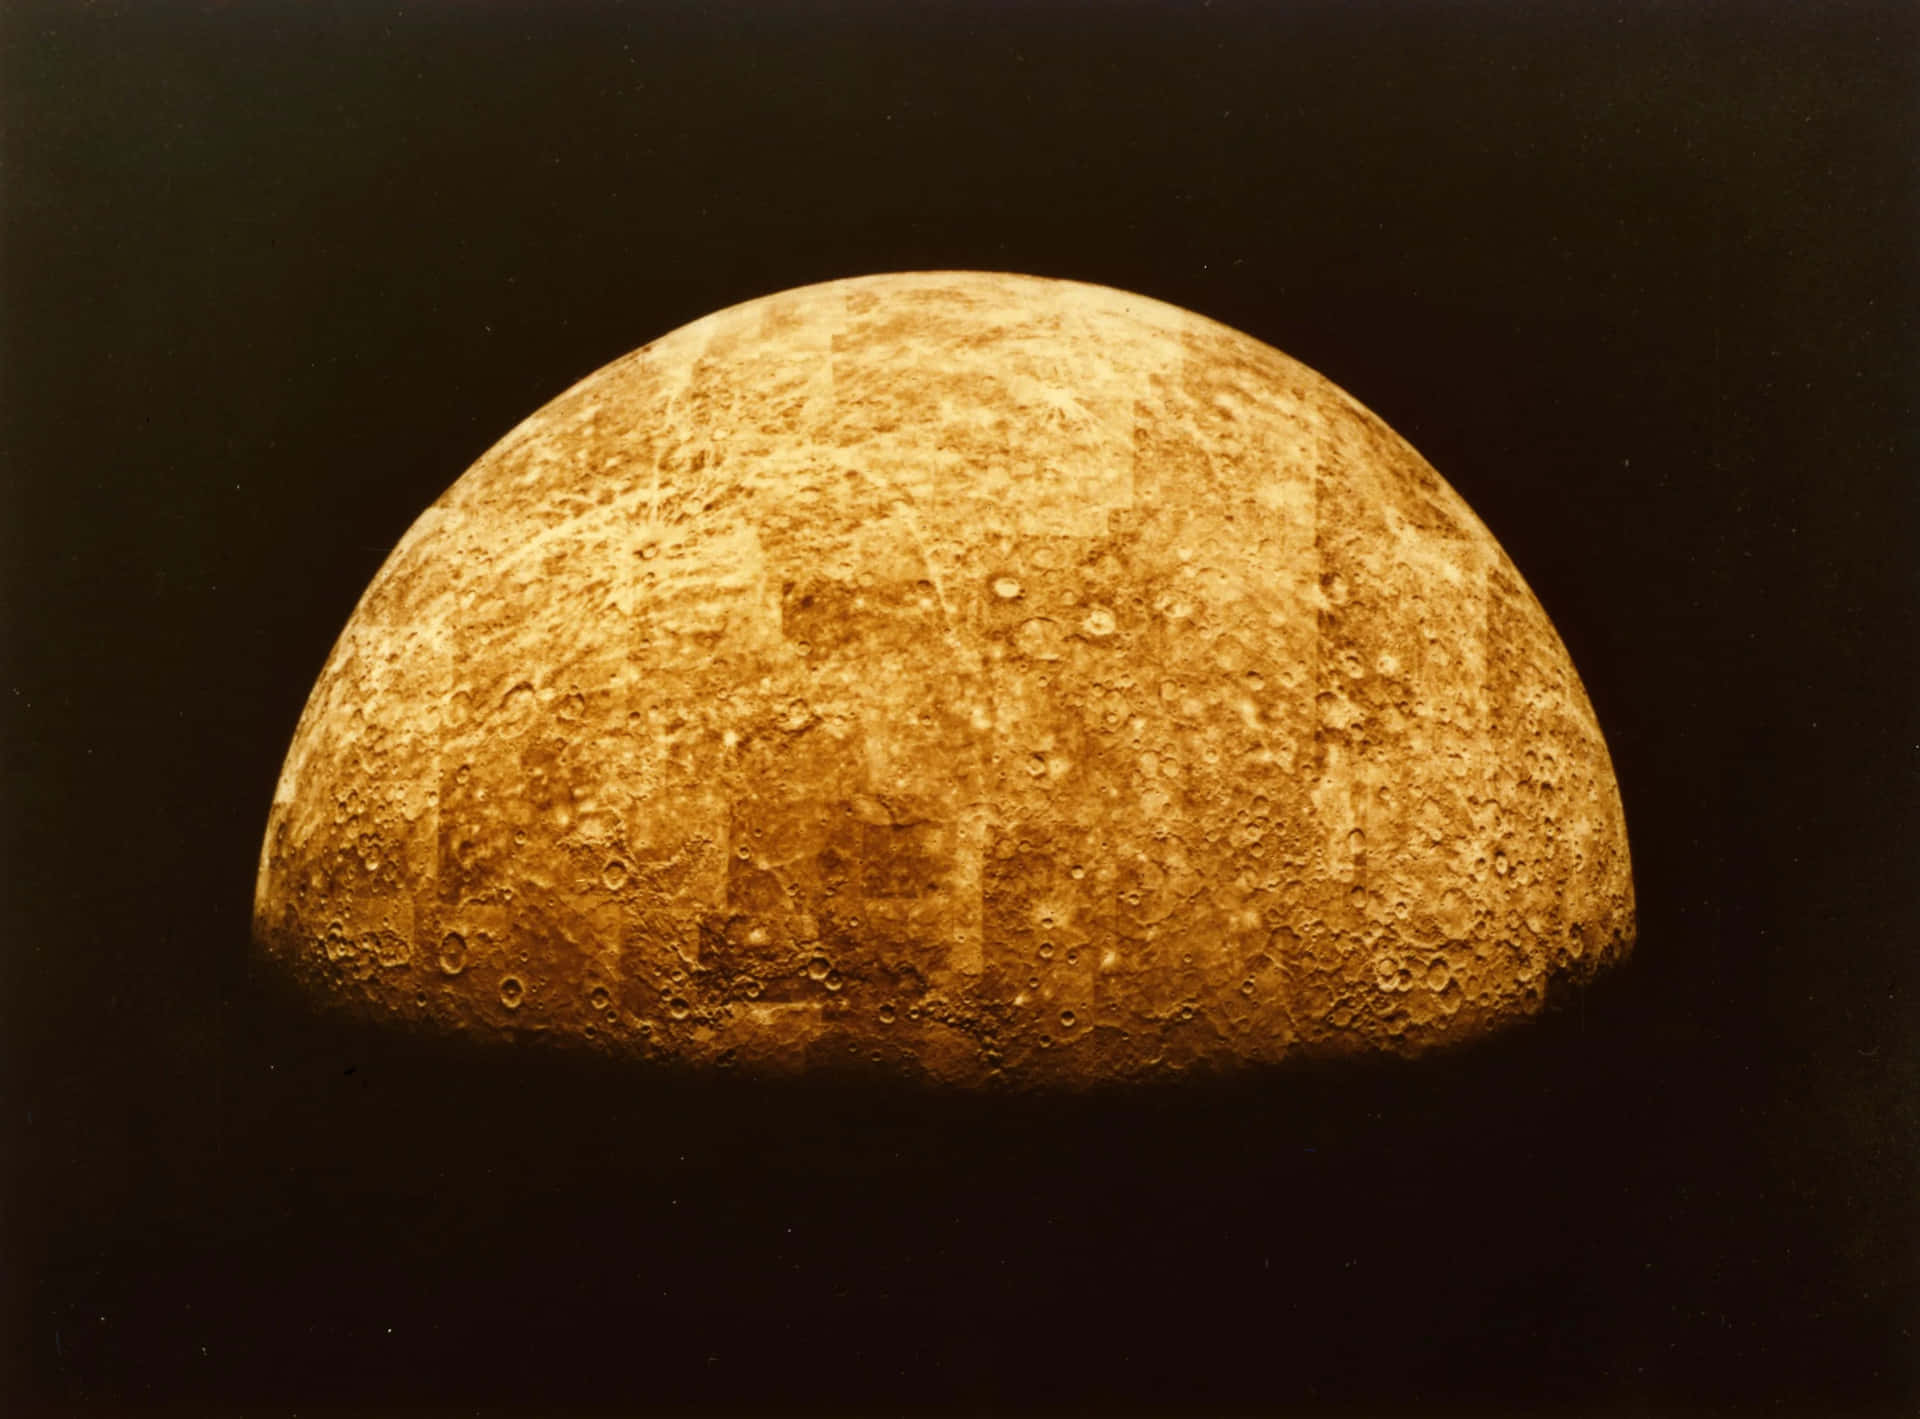 A Photograph Of A Large Yellow Moon